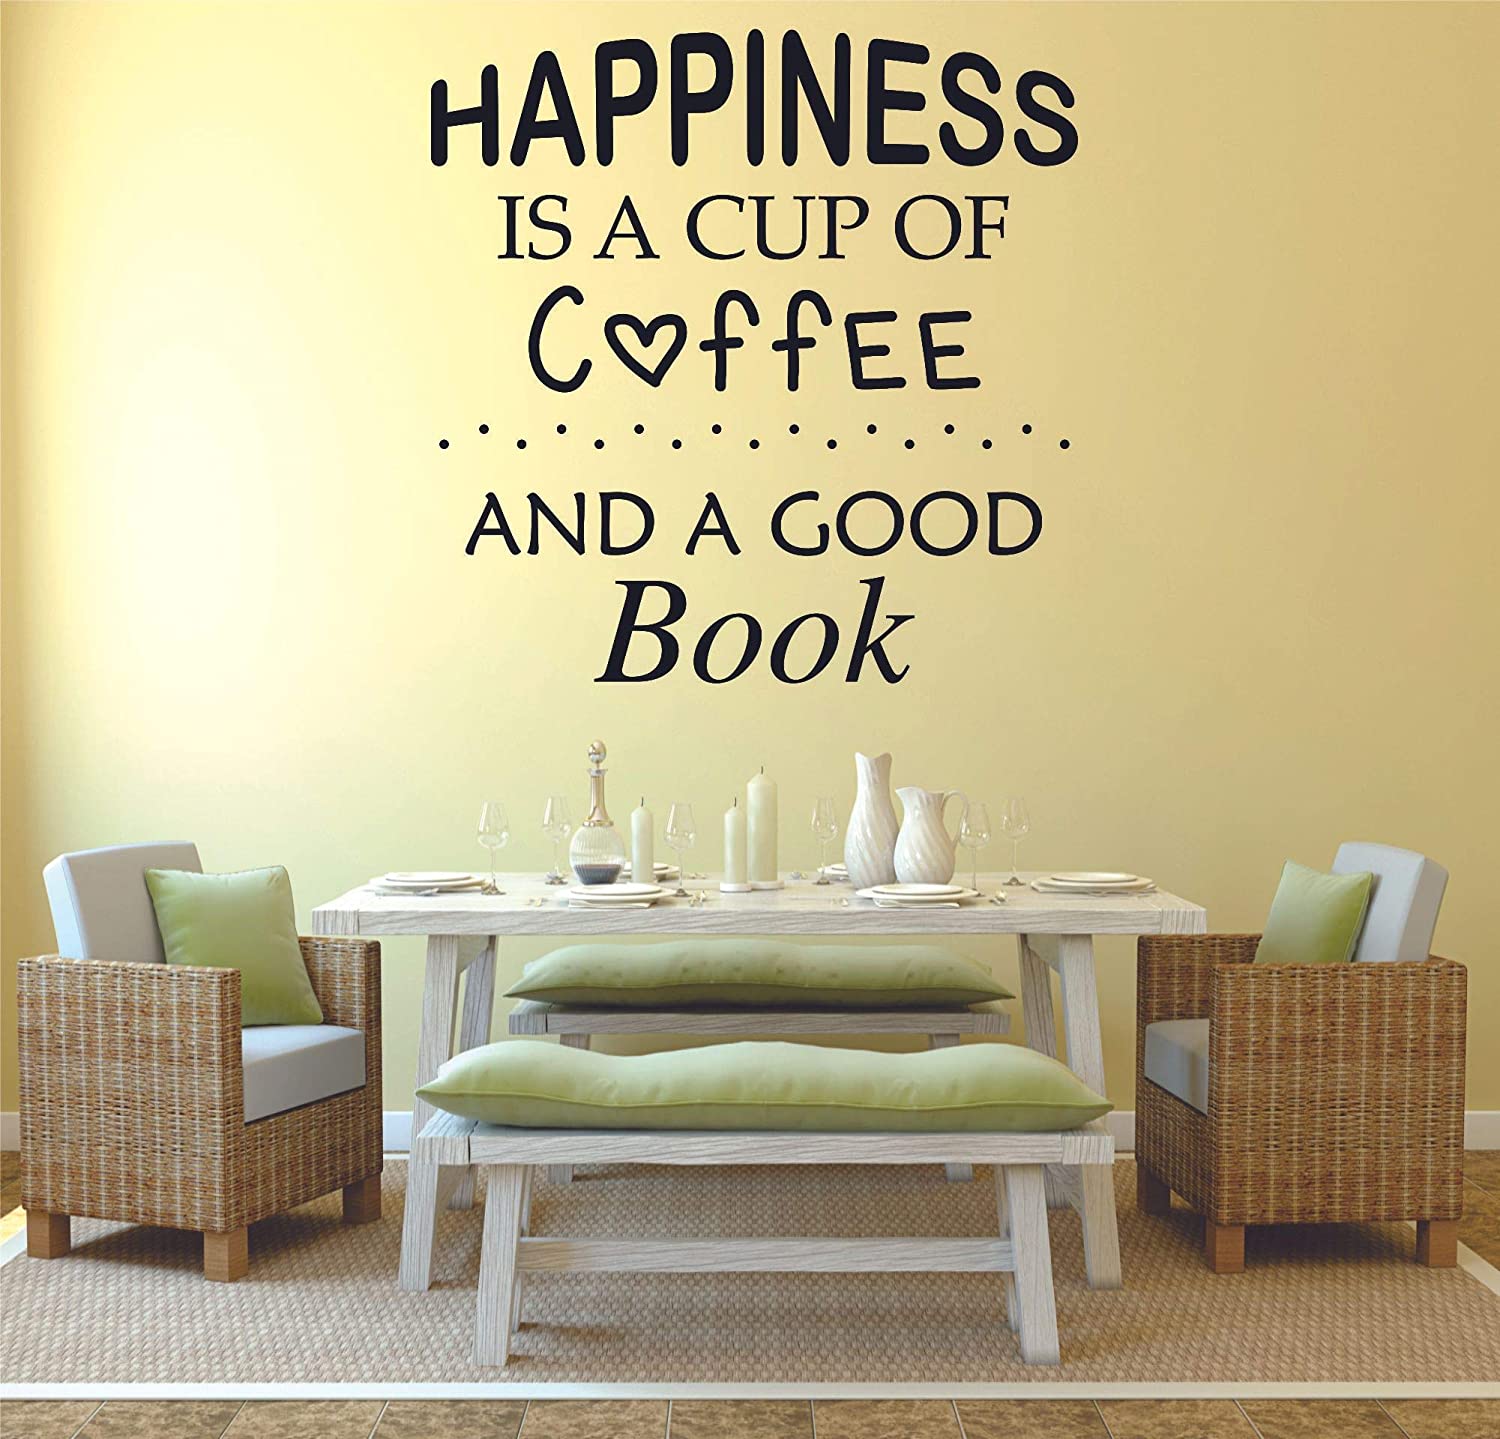 Happiness Is A Cup Of Coffee And A Good Book - Coffee Quotes Wall Stickers Cappuccino Mocha Latte Decor for Kitchen Dining Kitchen Cafe Wall Decals Stickers Wall Art Vinyl Decoration Size (10x10 inch) - image 1 of 3